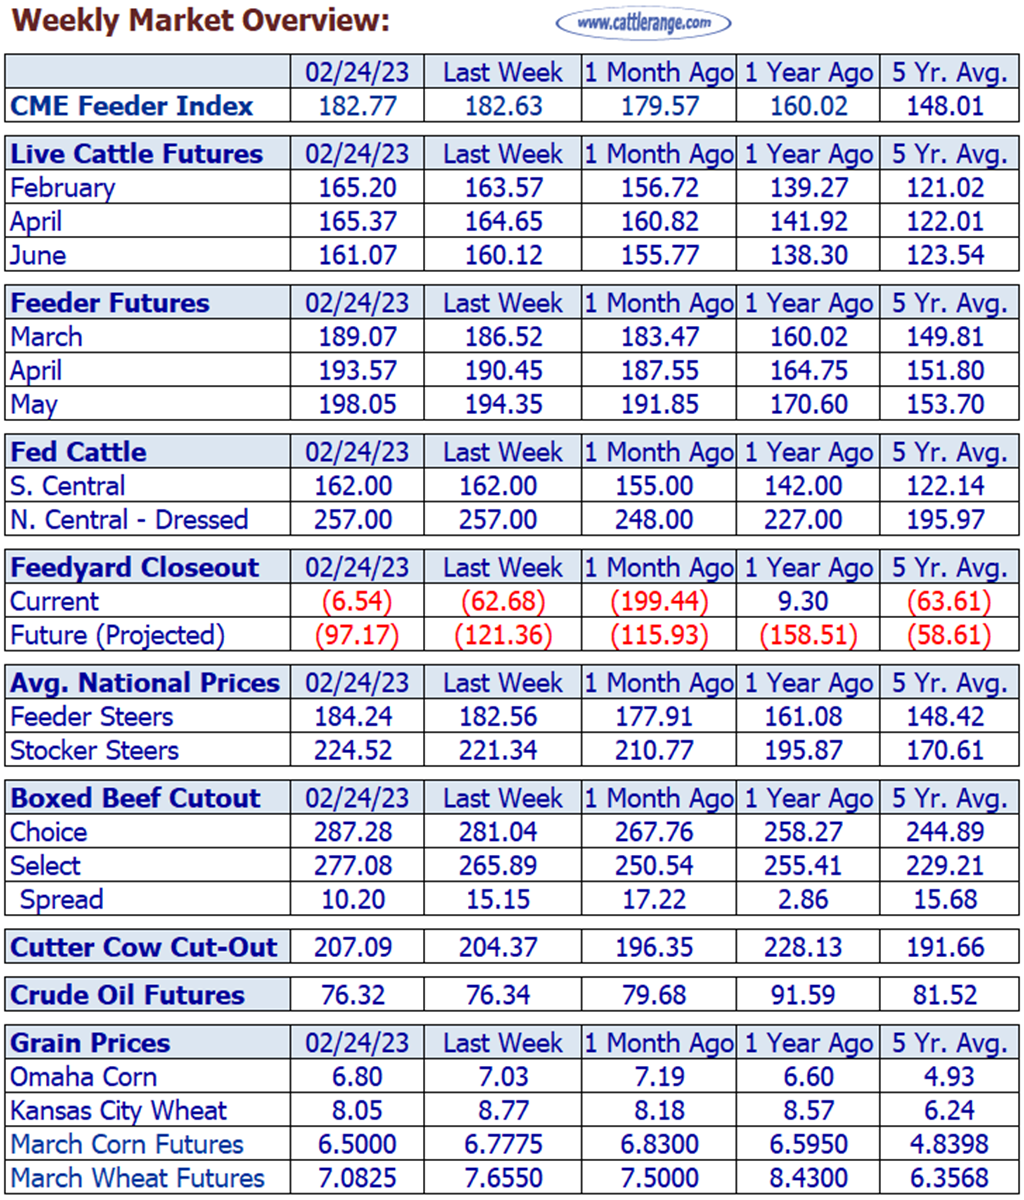 Weekly Cattle Market Overview for Week Ending 2/24/23